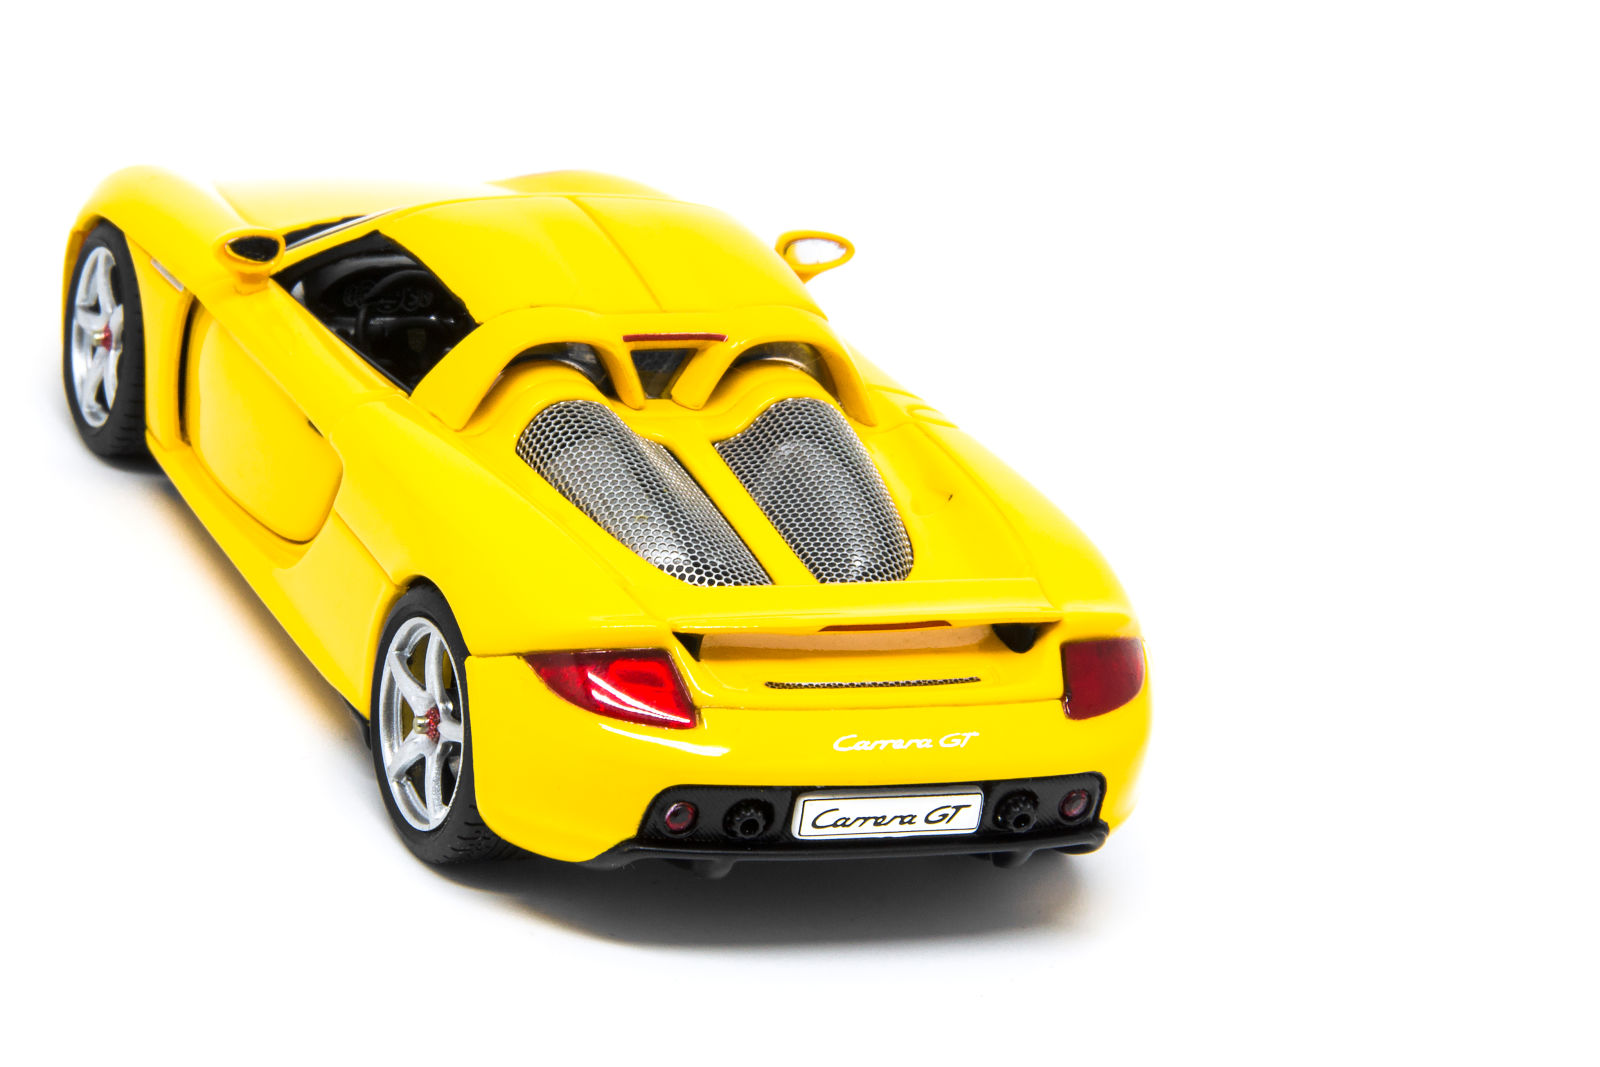 Pardon the paint choice. The PMY version is the most affordable 1:43 AUTOart Carrera GT of the lot.